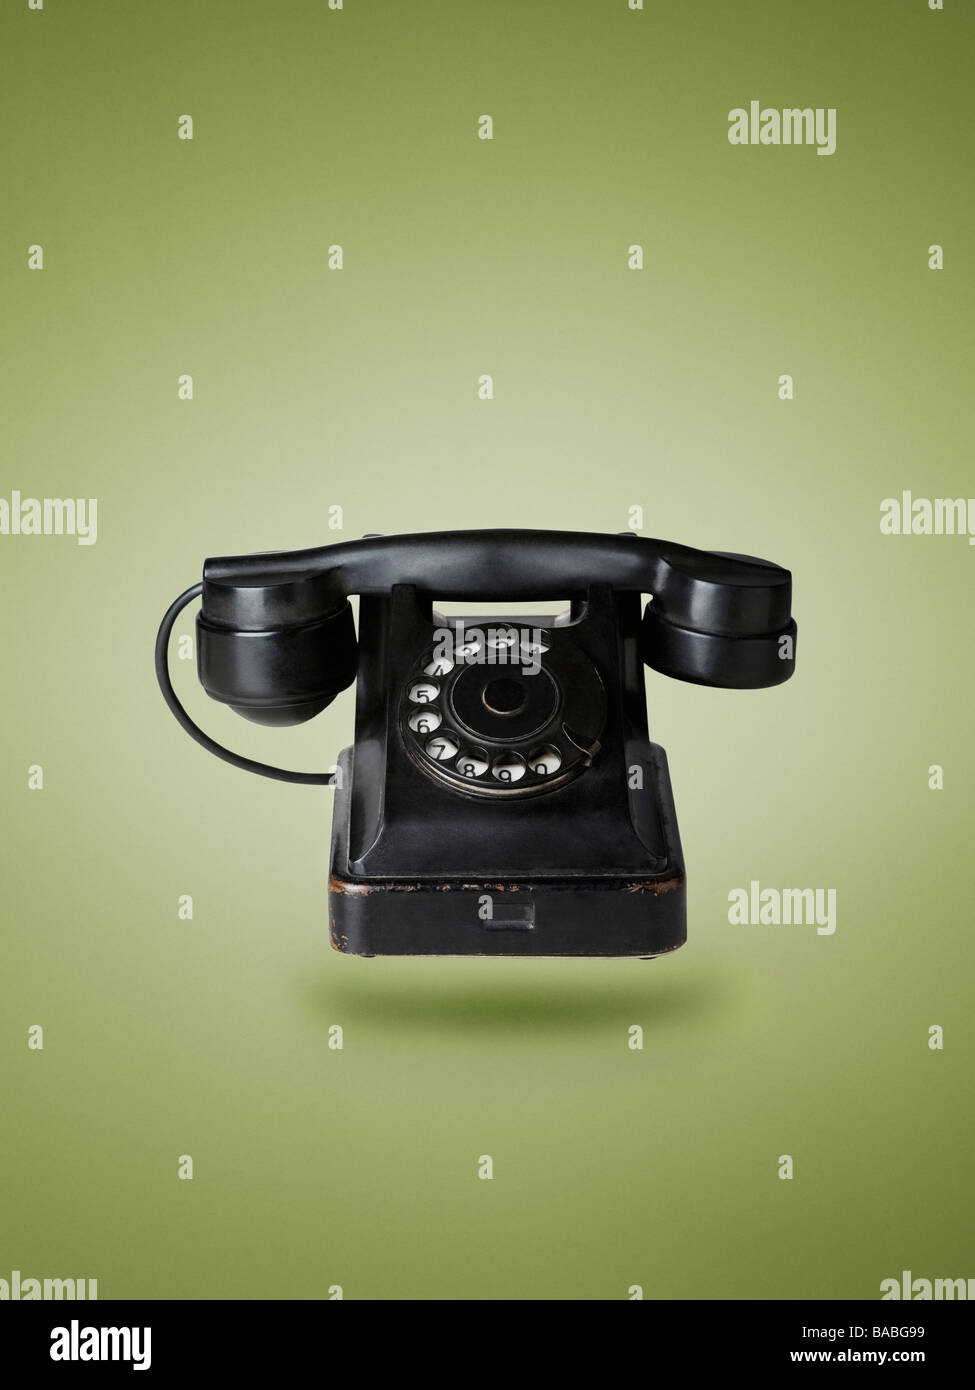 An old fashioned telephone Stock Photo